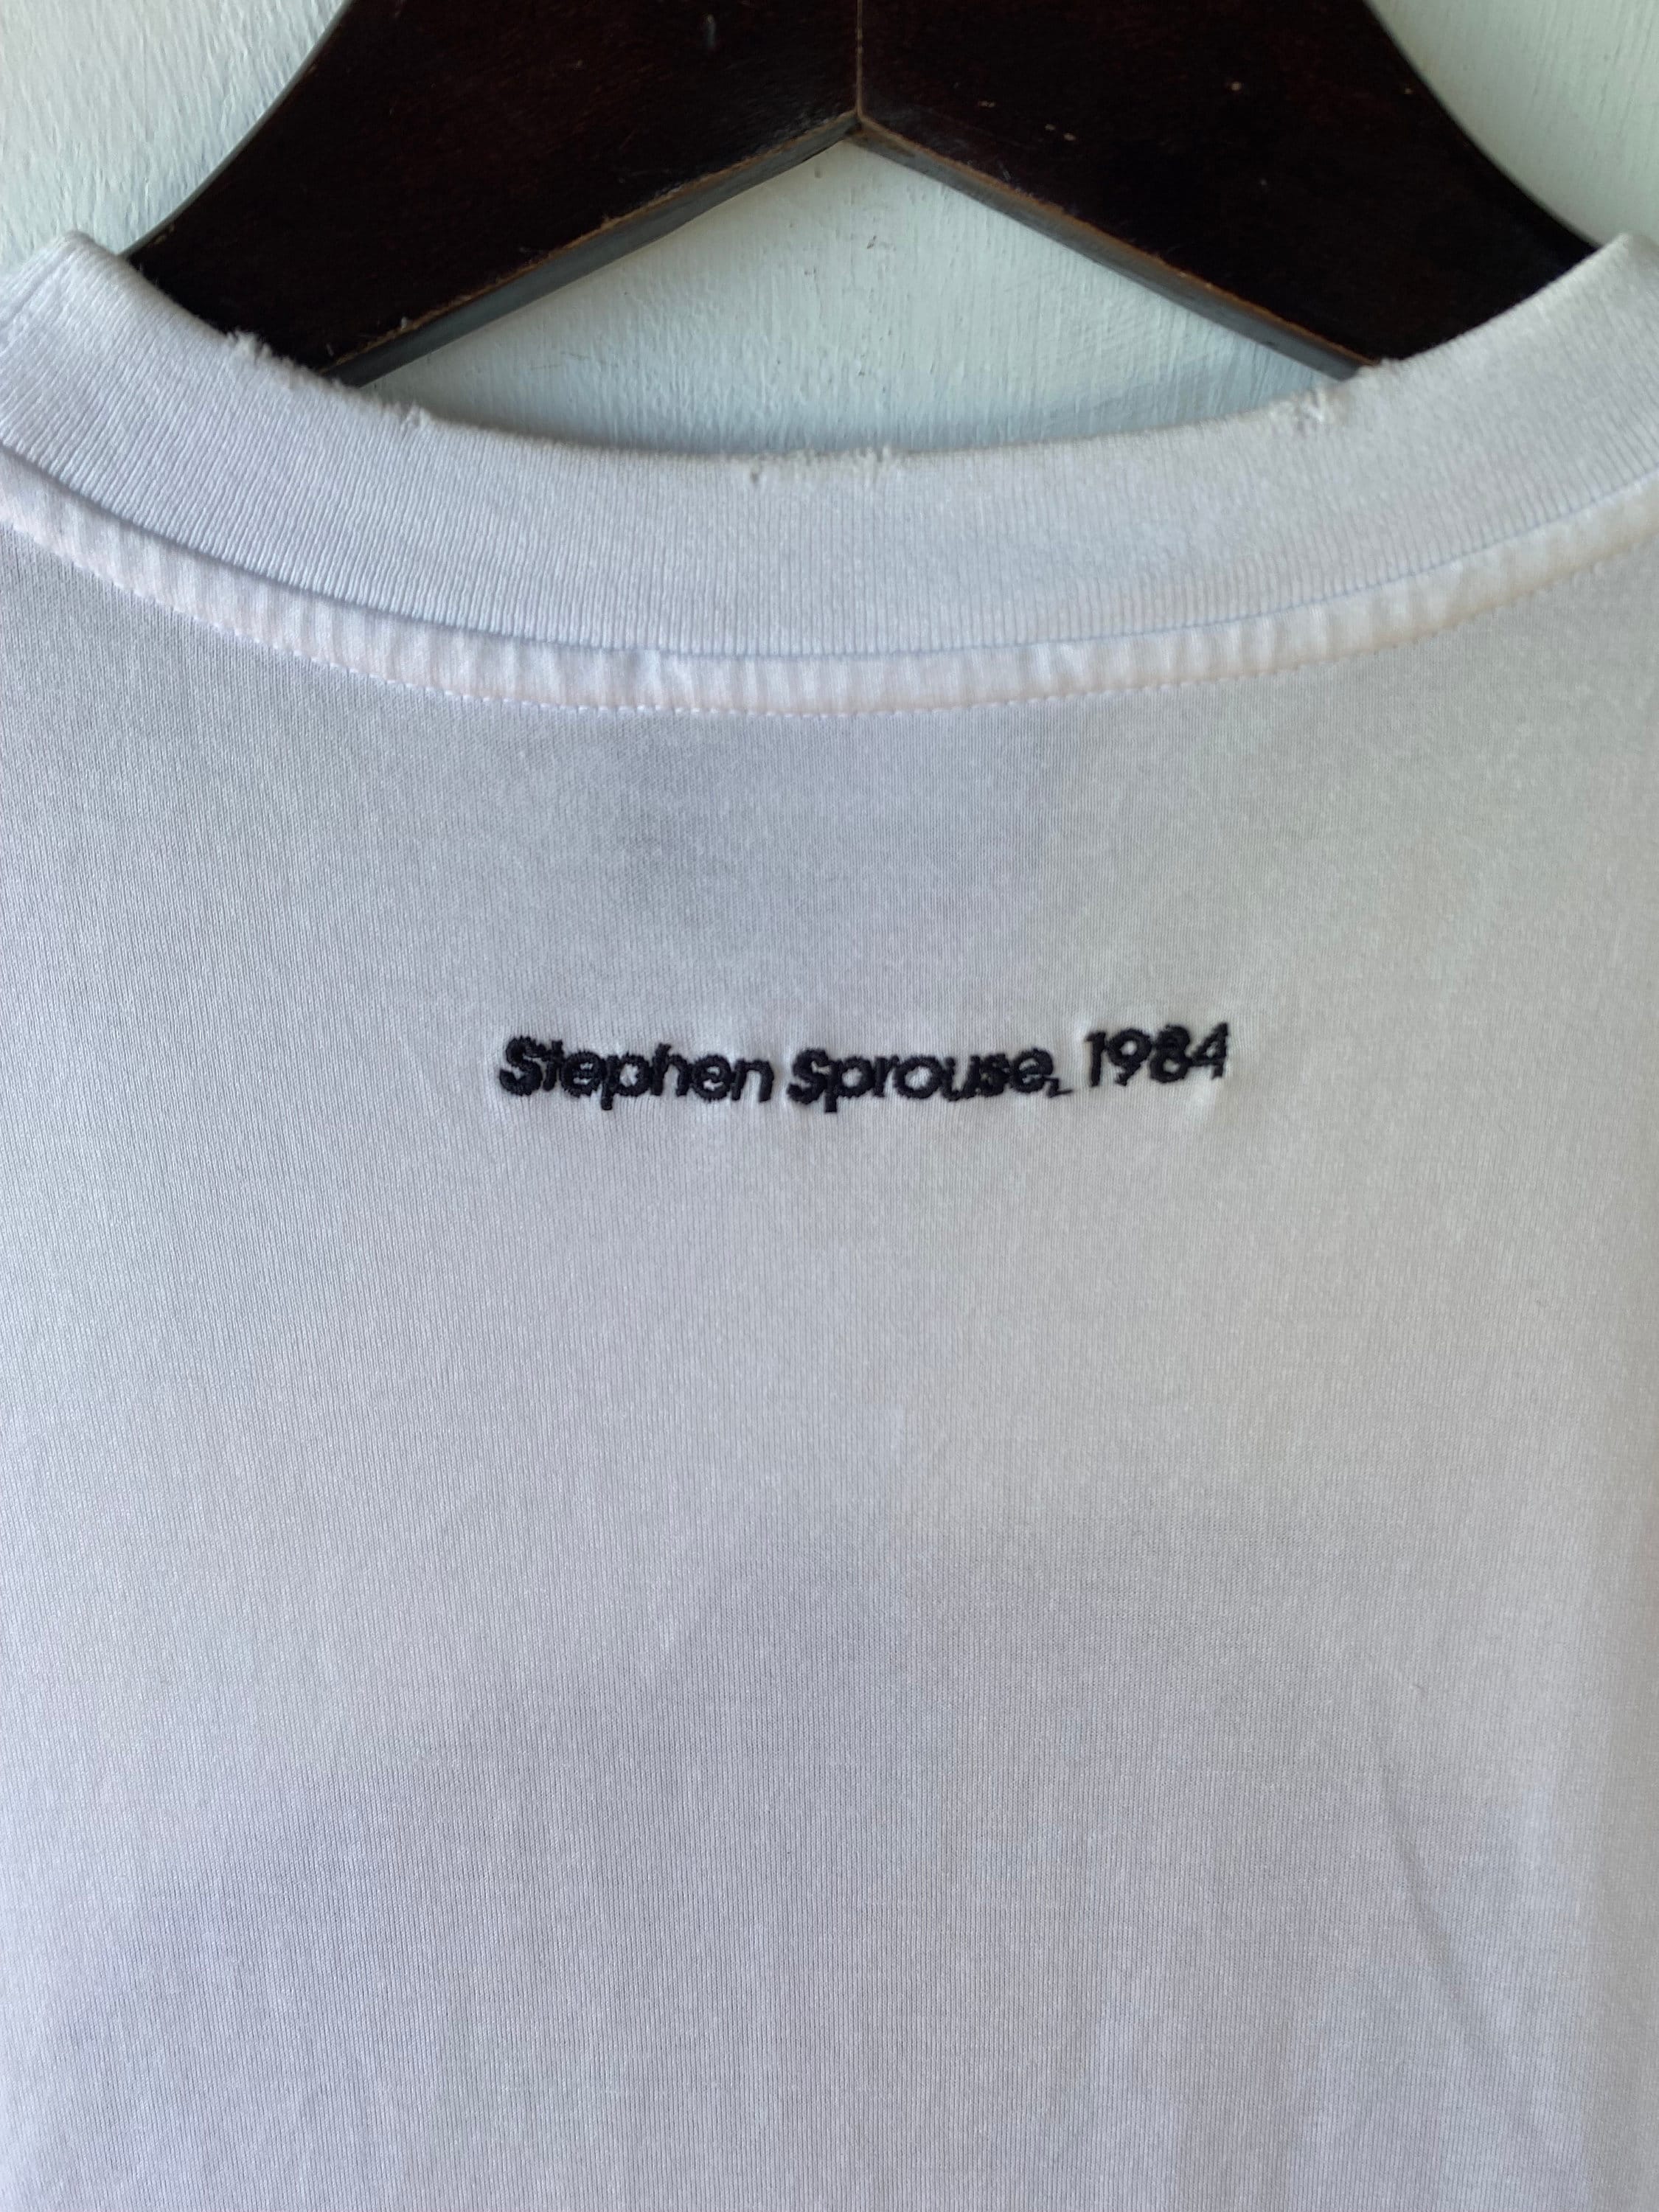 Stephen Sprouse - Authenticated T-Shirt - Cotton Black for Men, Very Good Condition